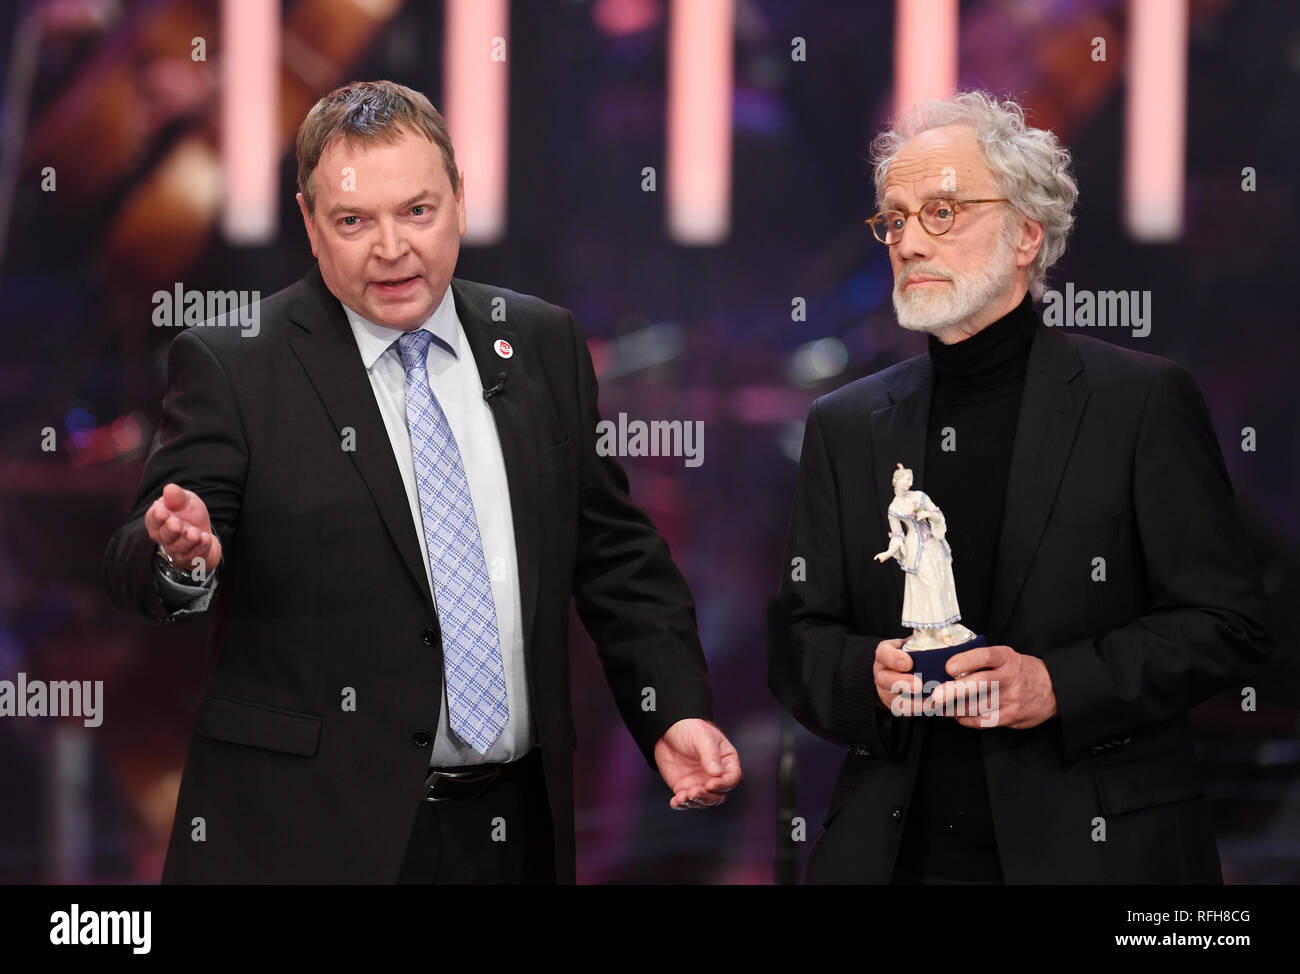 25 January 2019, Bavaria, München: Markus Imhoof (r), Swiss film director, receives his award from Claus-Peter Reisch, captain of the Lifeline rescue ship, at the Bavarian Film Award ceremony in the Prinzregententheater. Imhoof was awarded the documentary film prize for the film 'Eldorado'. Photo: Tobias Hase/dpa Stock Photo